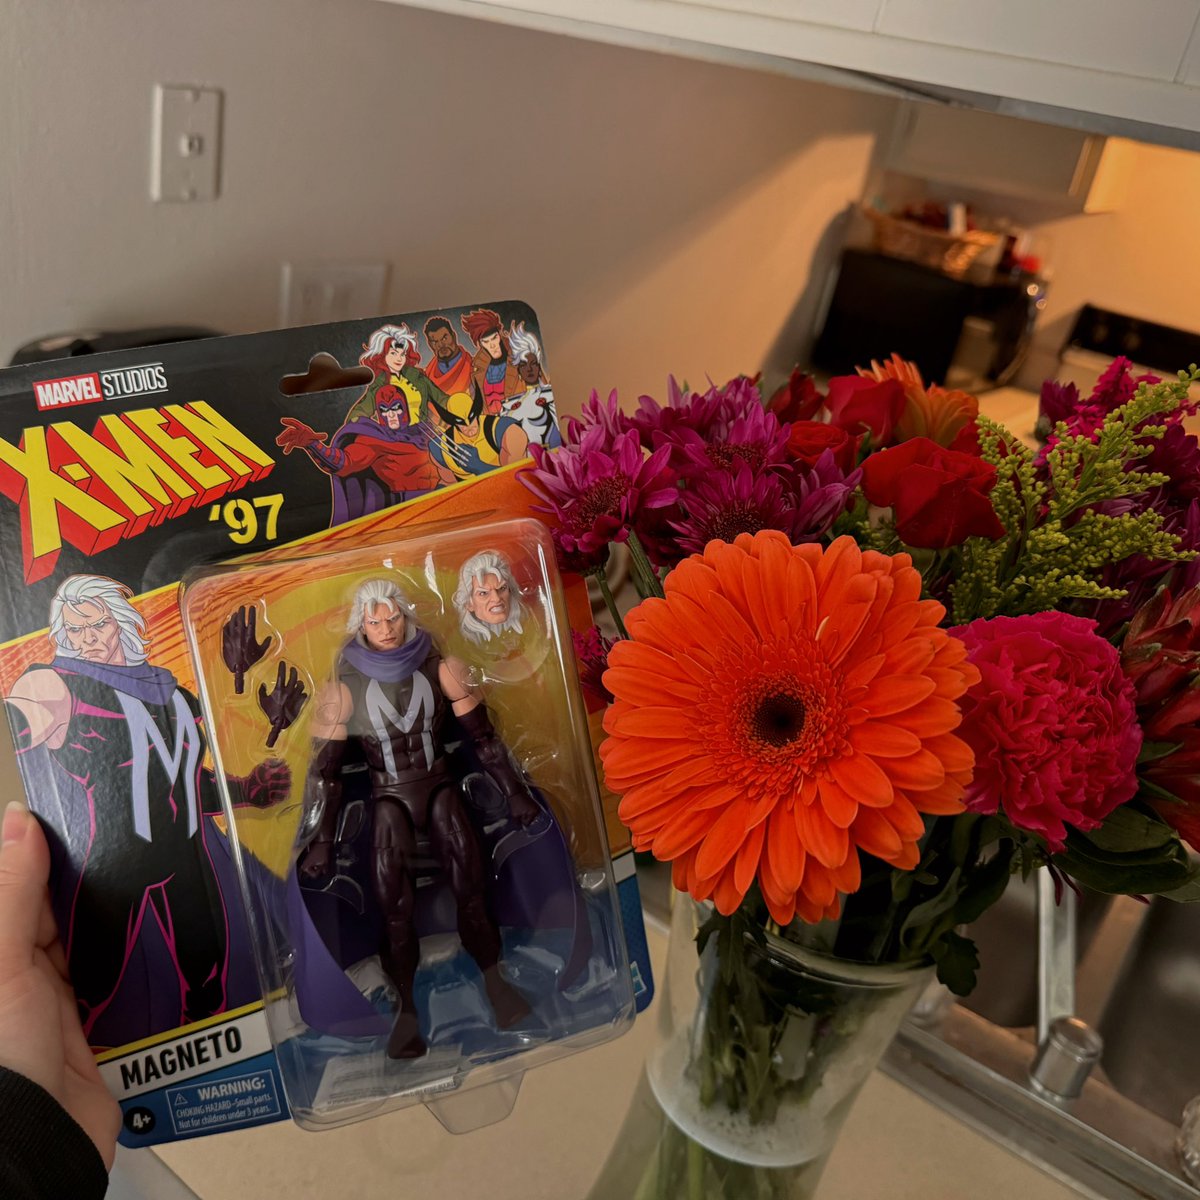 my bf got me slutty magneto and some flowers 🥹